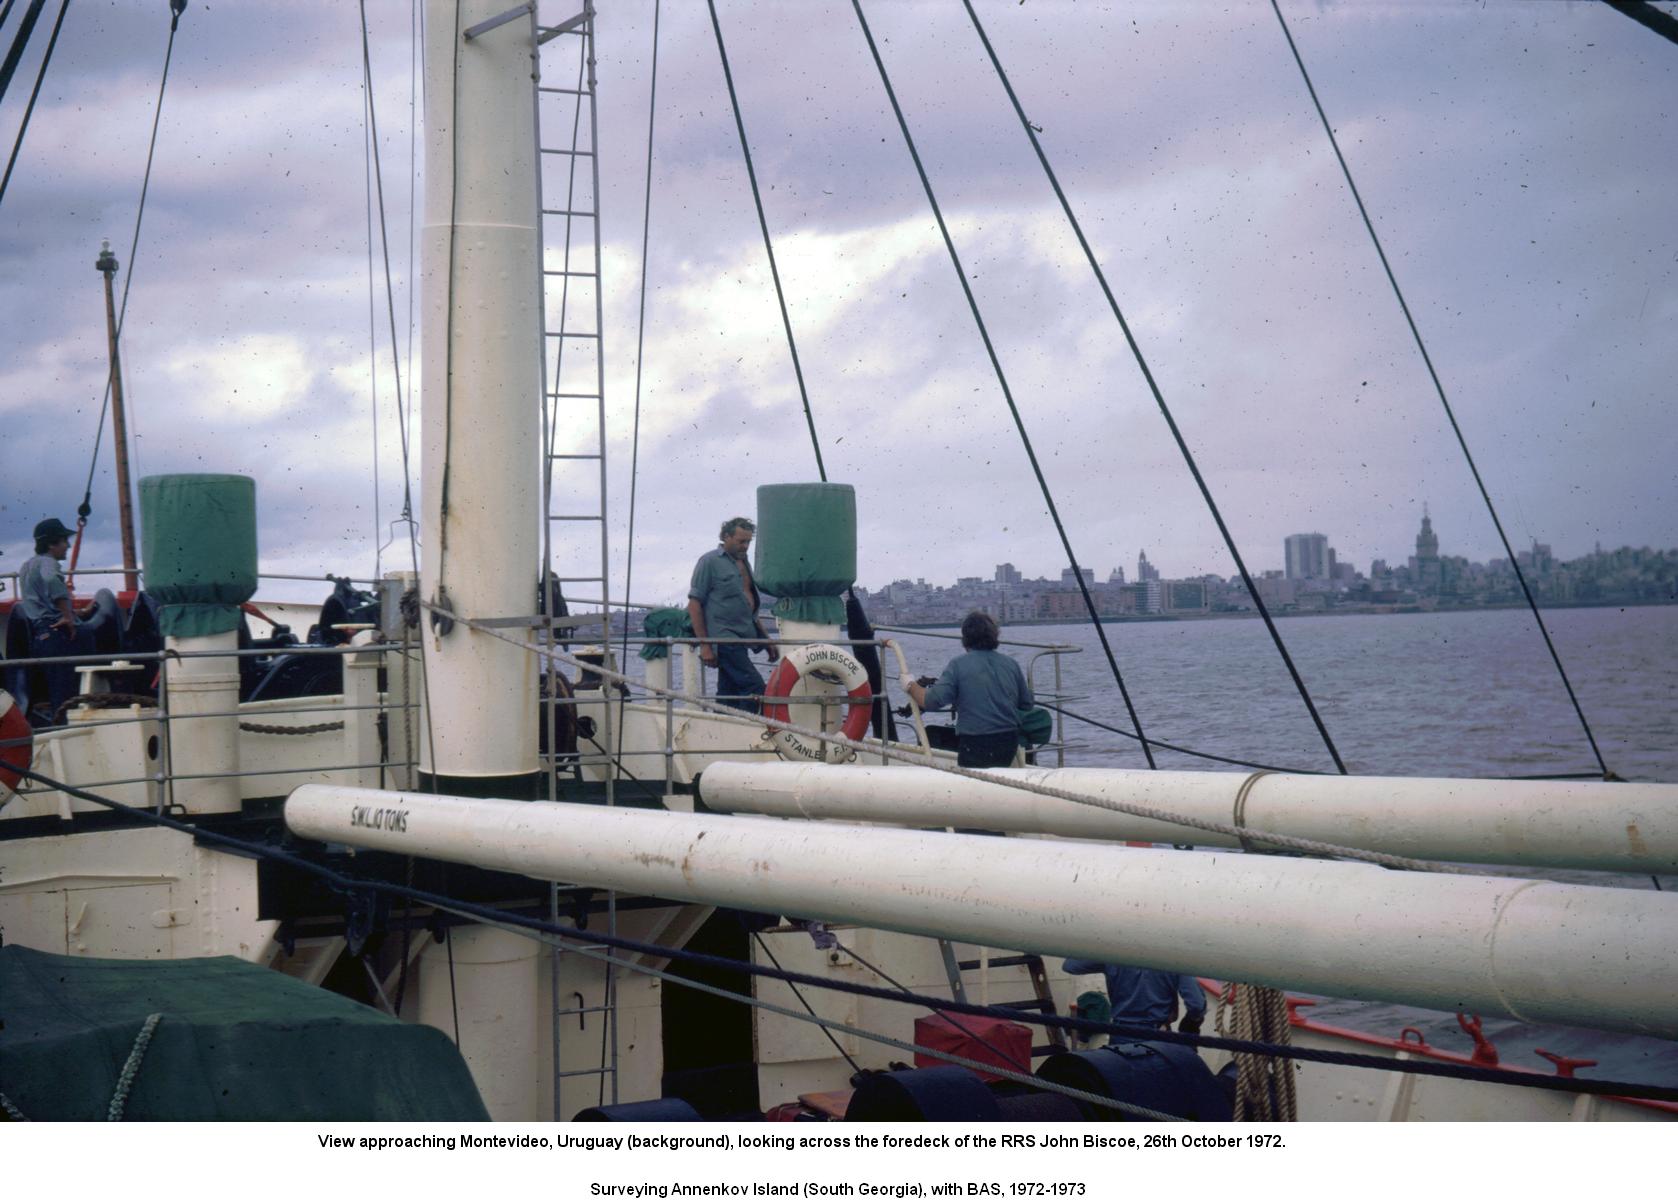 View of Montevideo (background), looking across the the foredeck of the RRS John Biscoe, 26th October 1972.